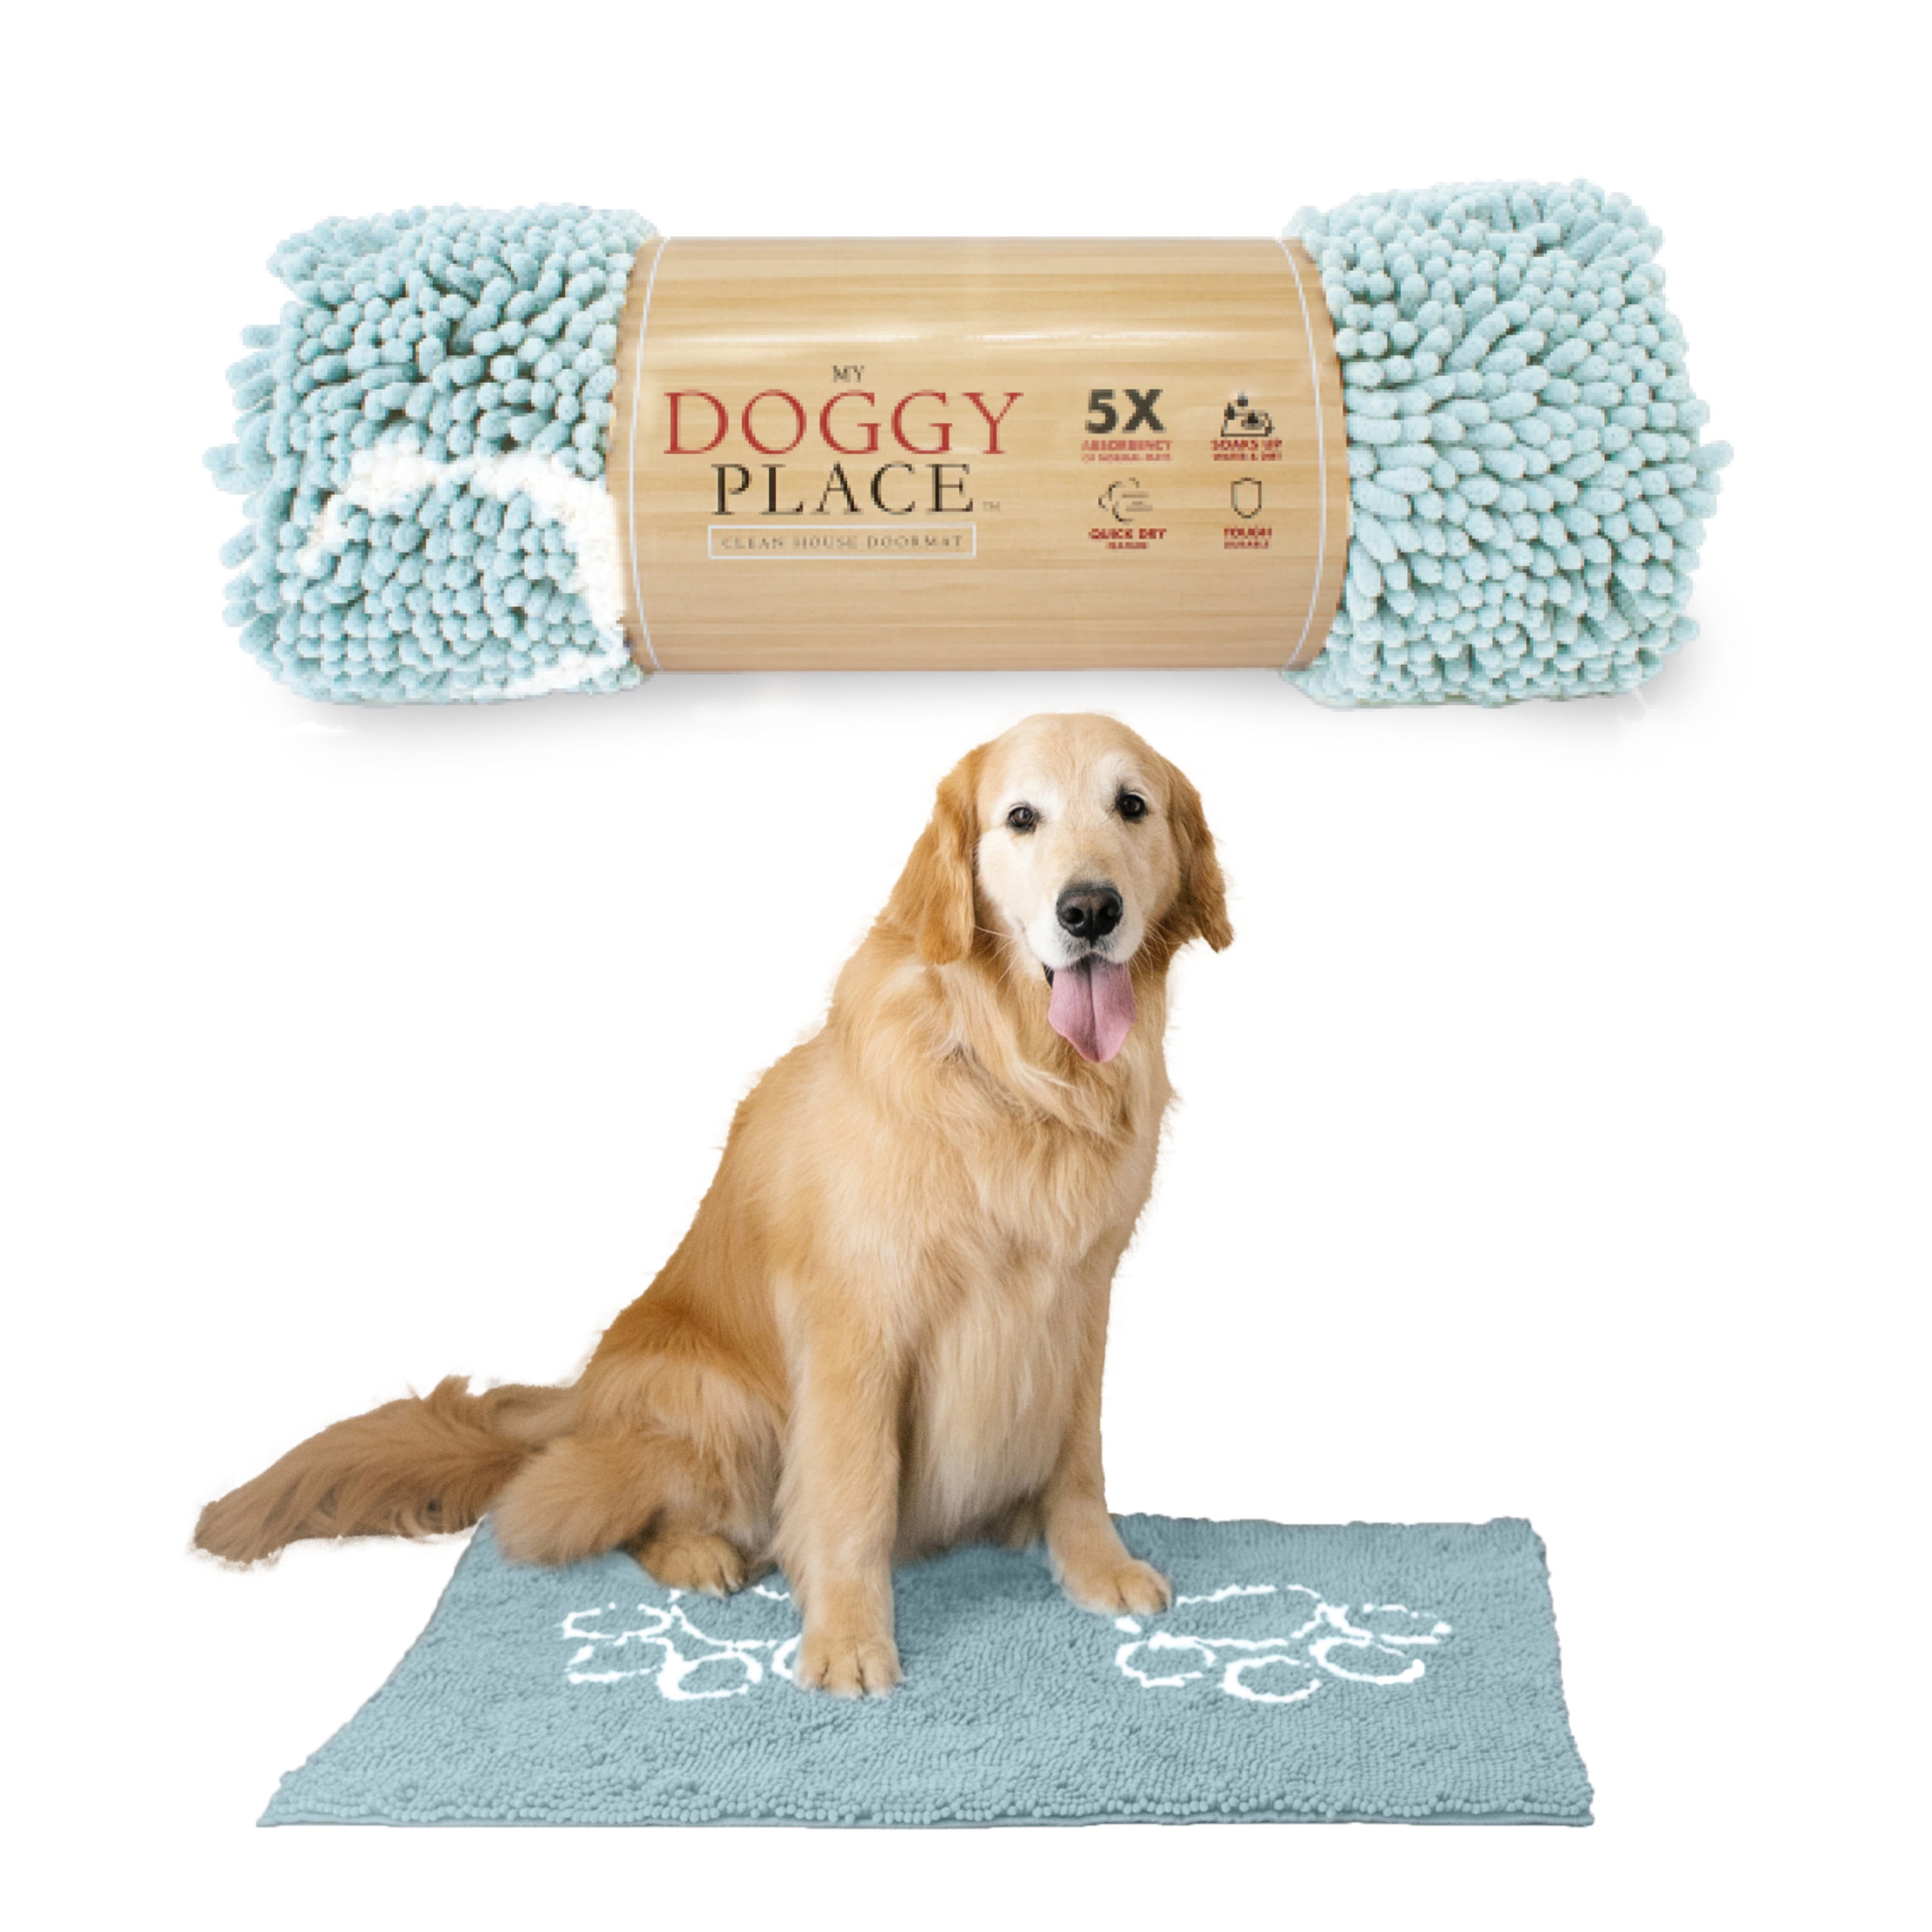 Paws Doormat Personalize Your Outdoor Dog Mat For A Muddy Paws Welcome -  Geeowl